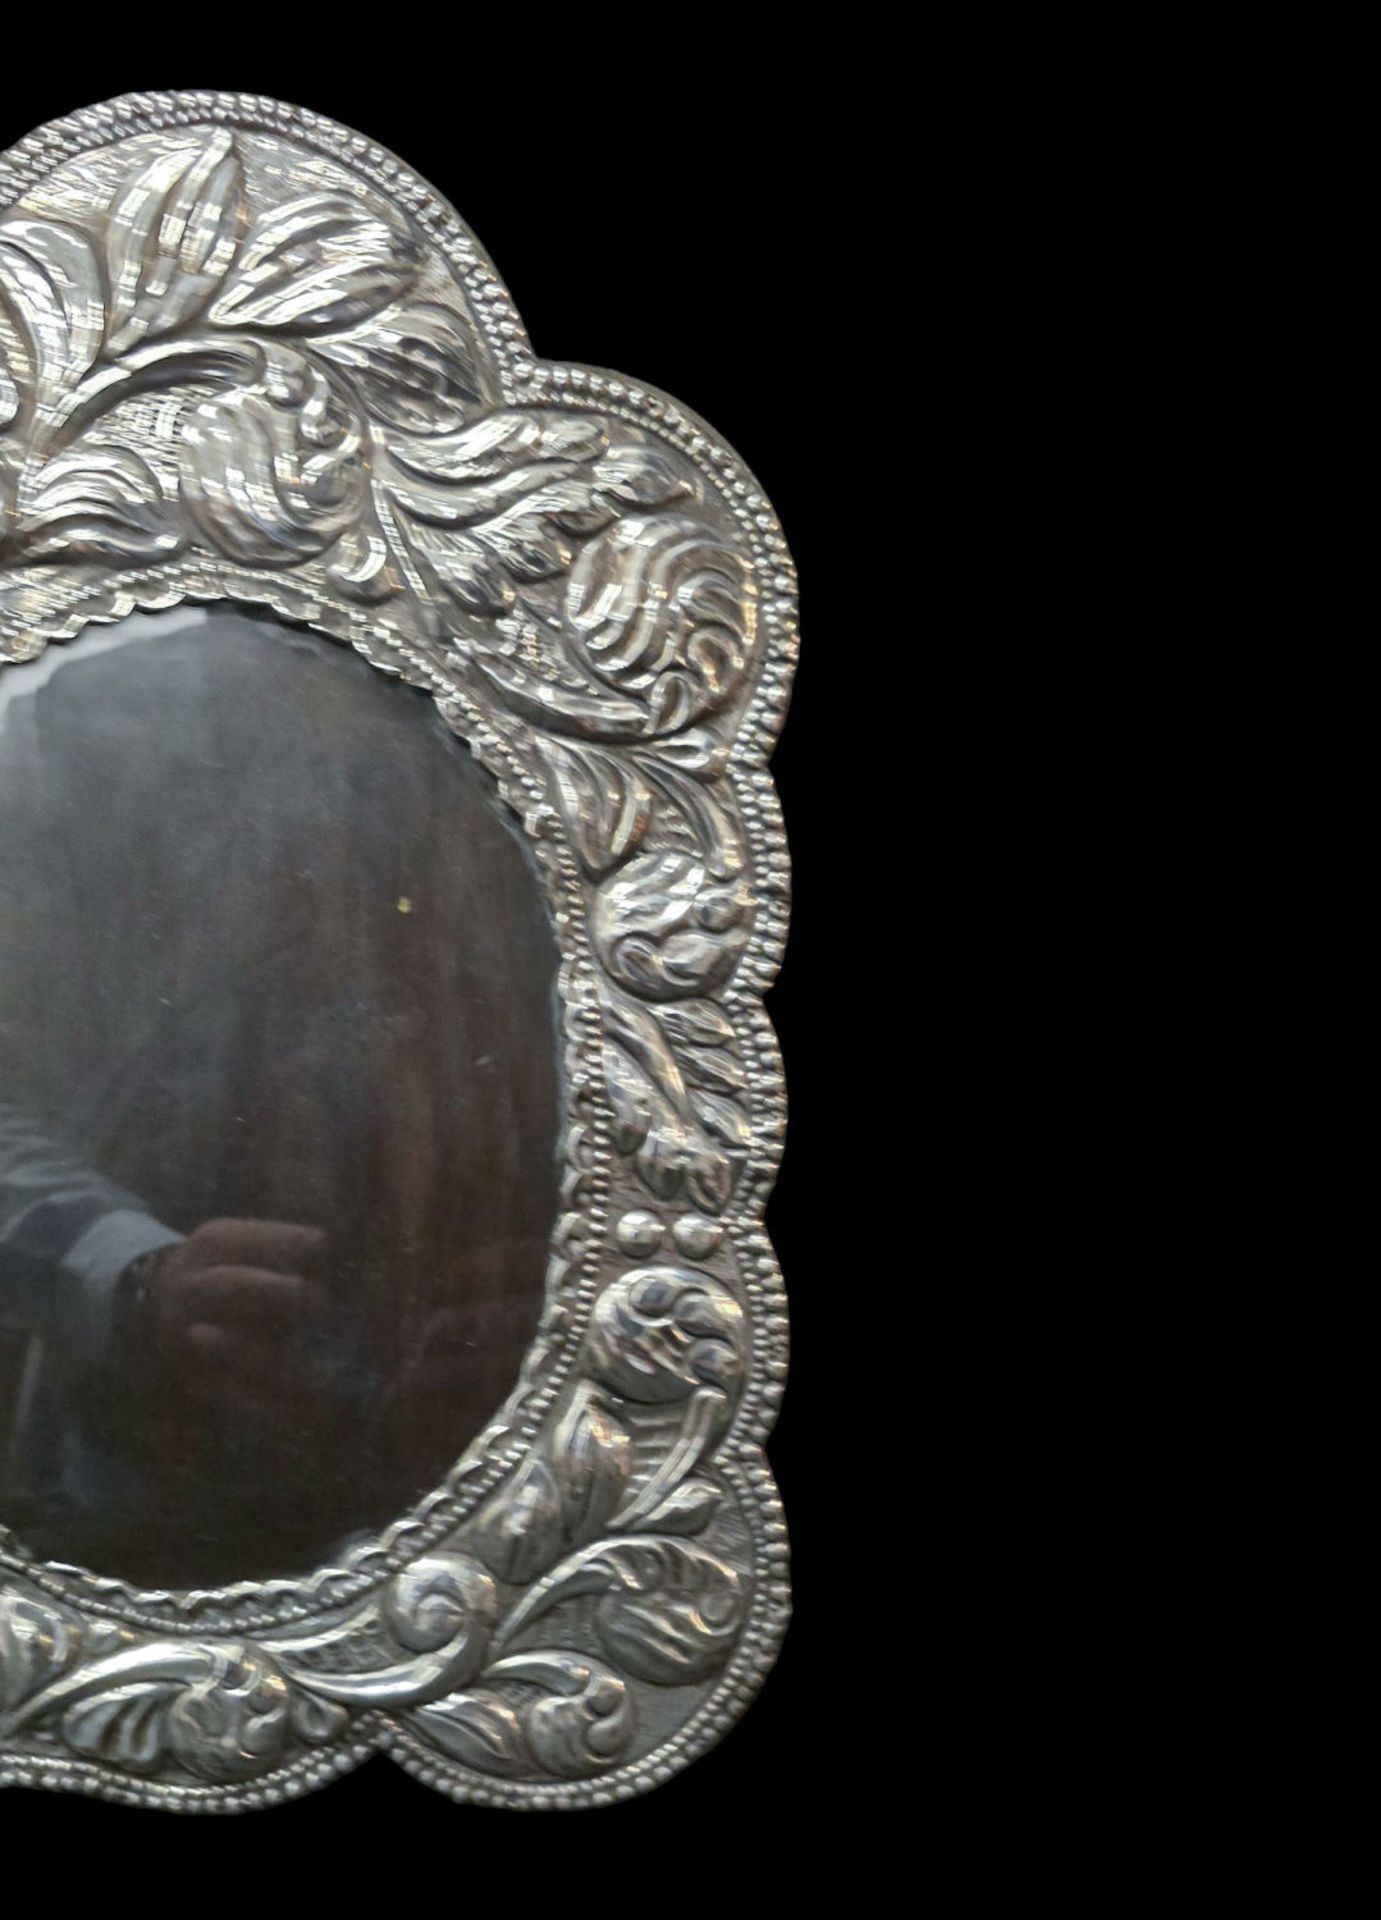 Exquisite large double oval table frame in Peruvian sterling silver, late 19th century - early 20th  - Bild 4 aus 6